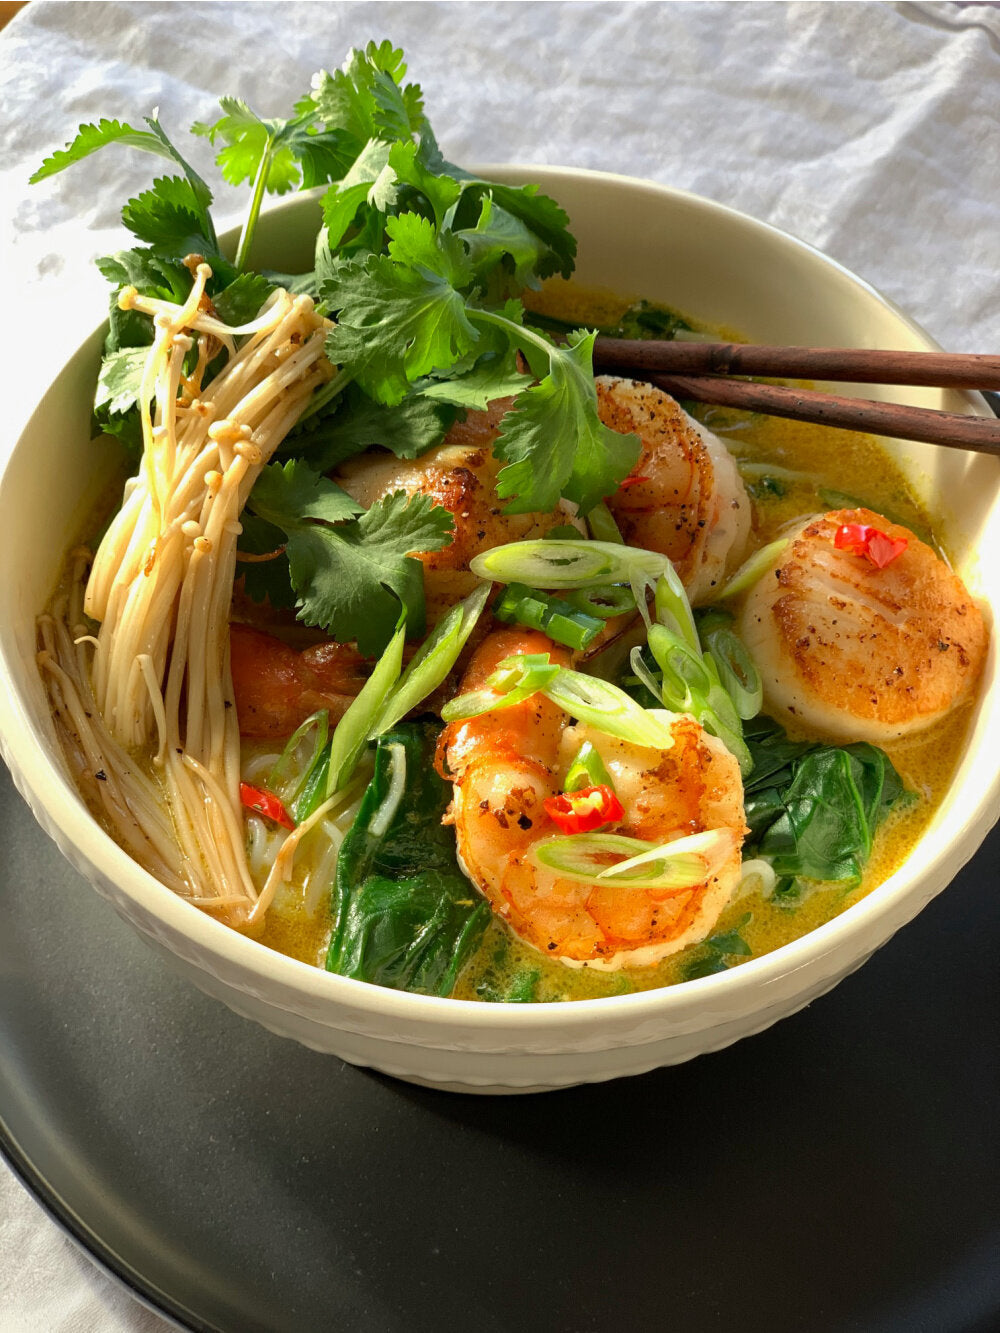 YELLOW THAI CURRY SOUP WITH SEAFOOD, SPINACH AND NOODLES